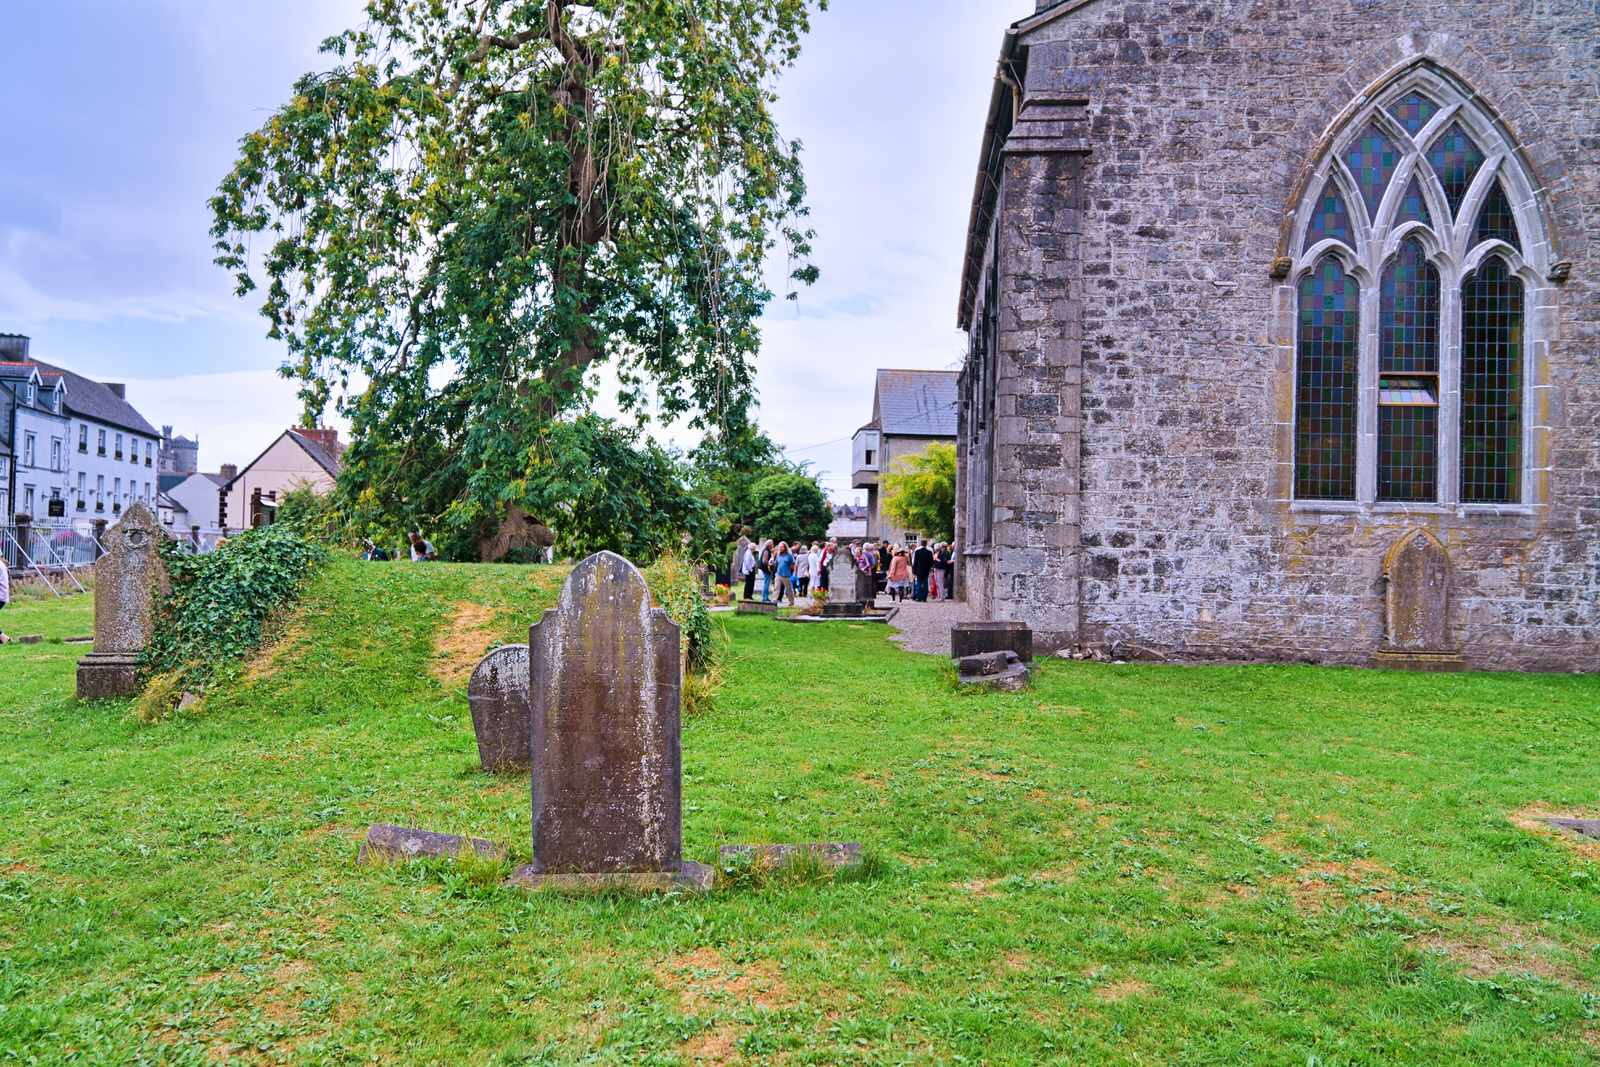 THE OLDER ST JOHN'S CHURCH IN KILKENNY AUGUST 2018 [ANGLICAN COMMUNION]-234328-1